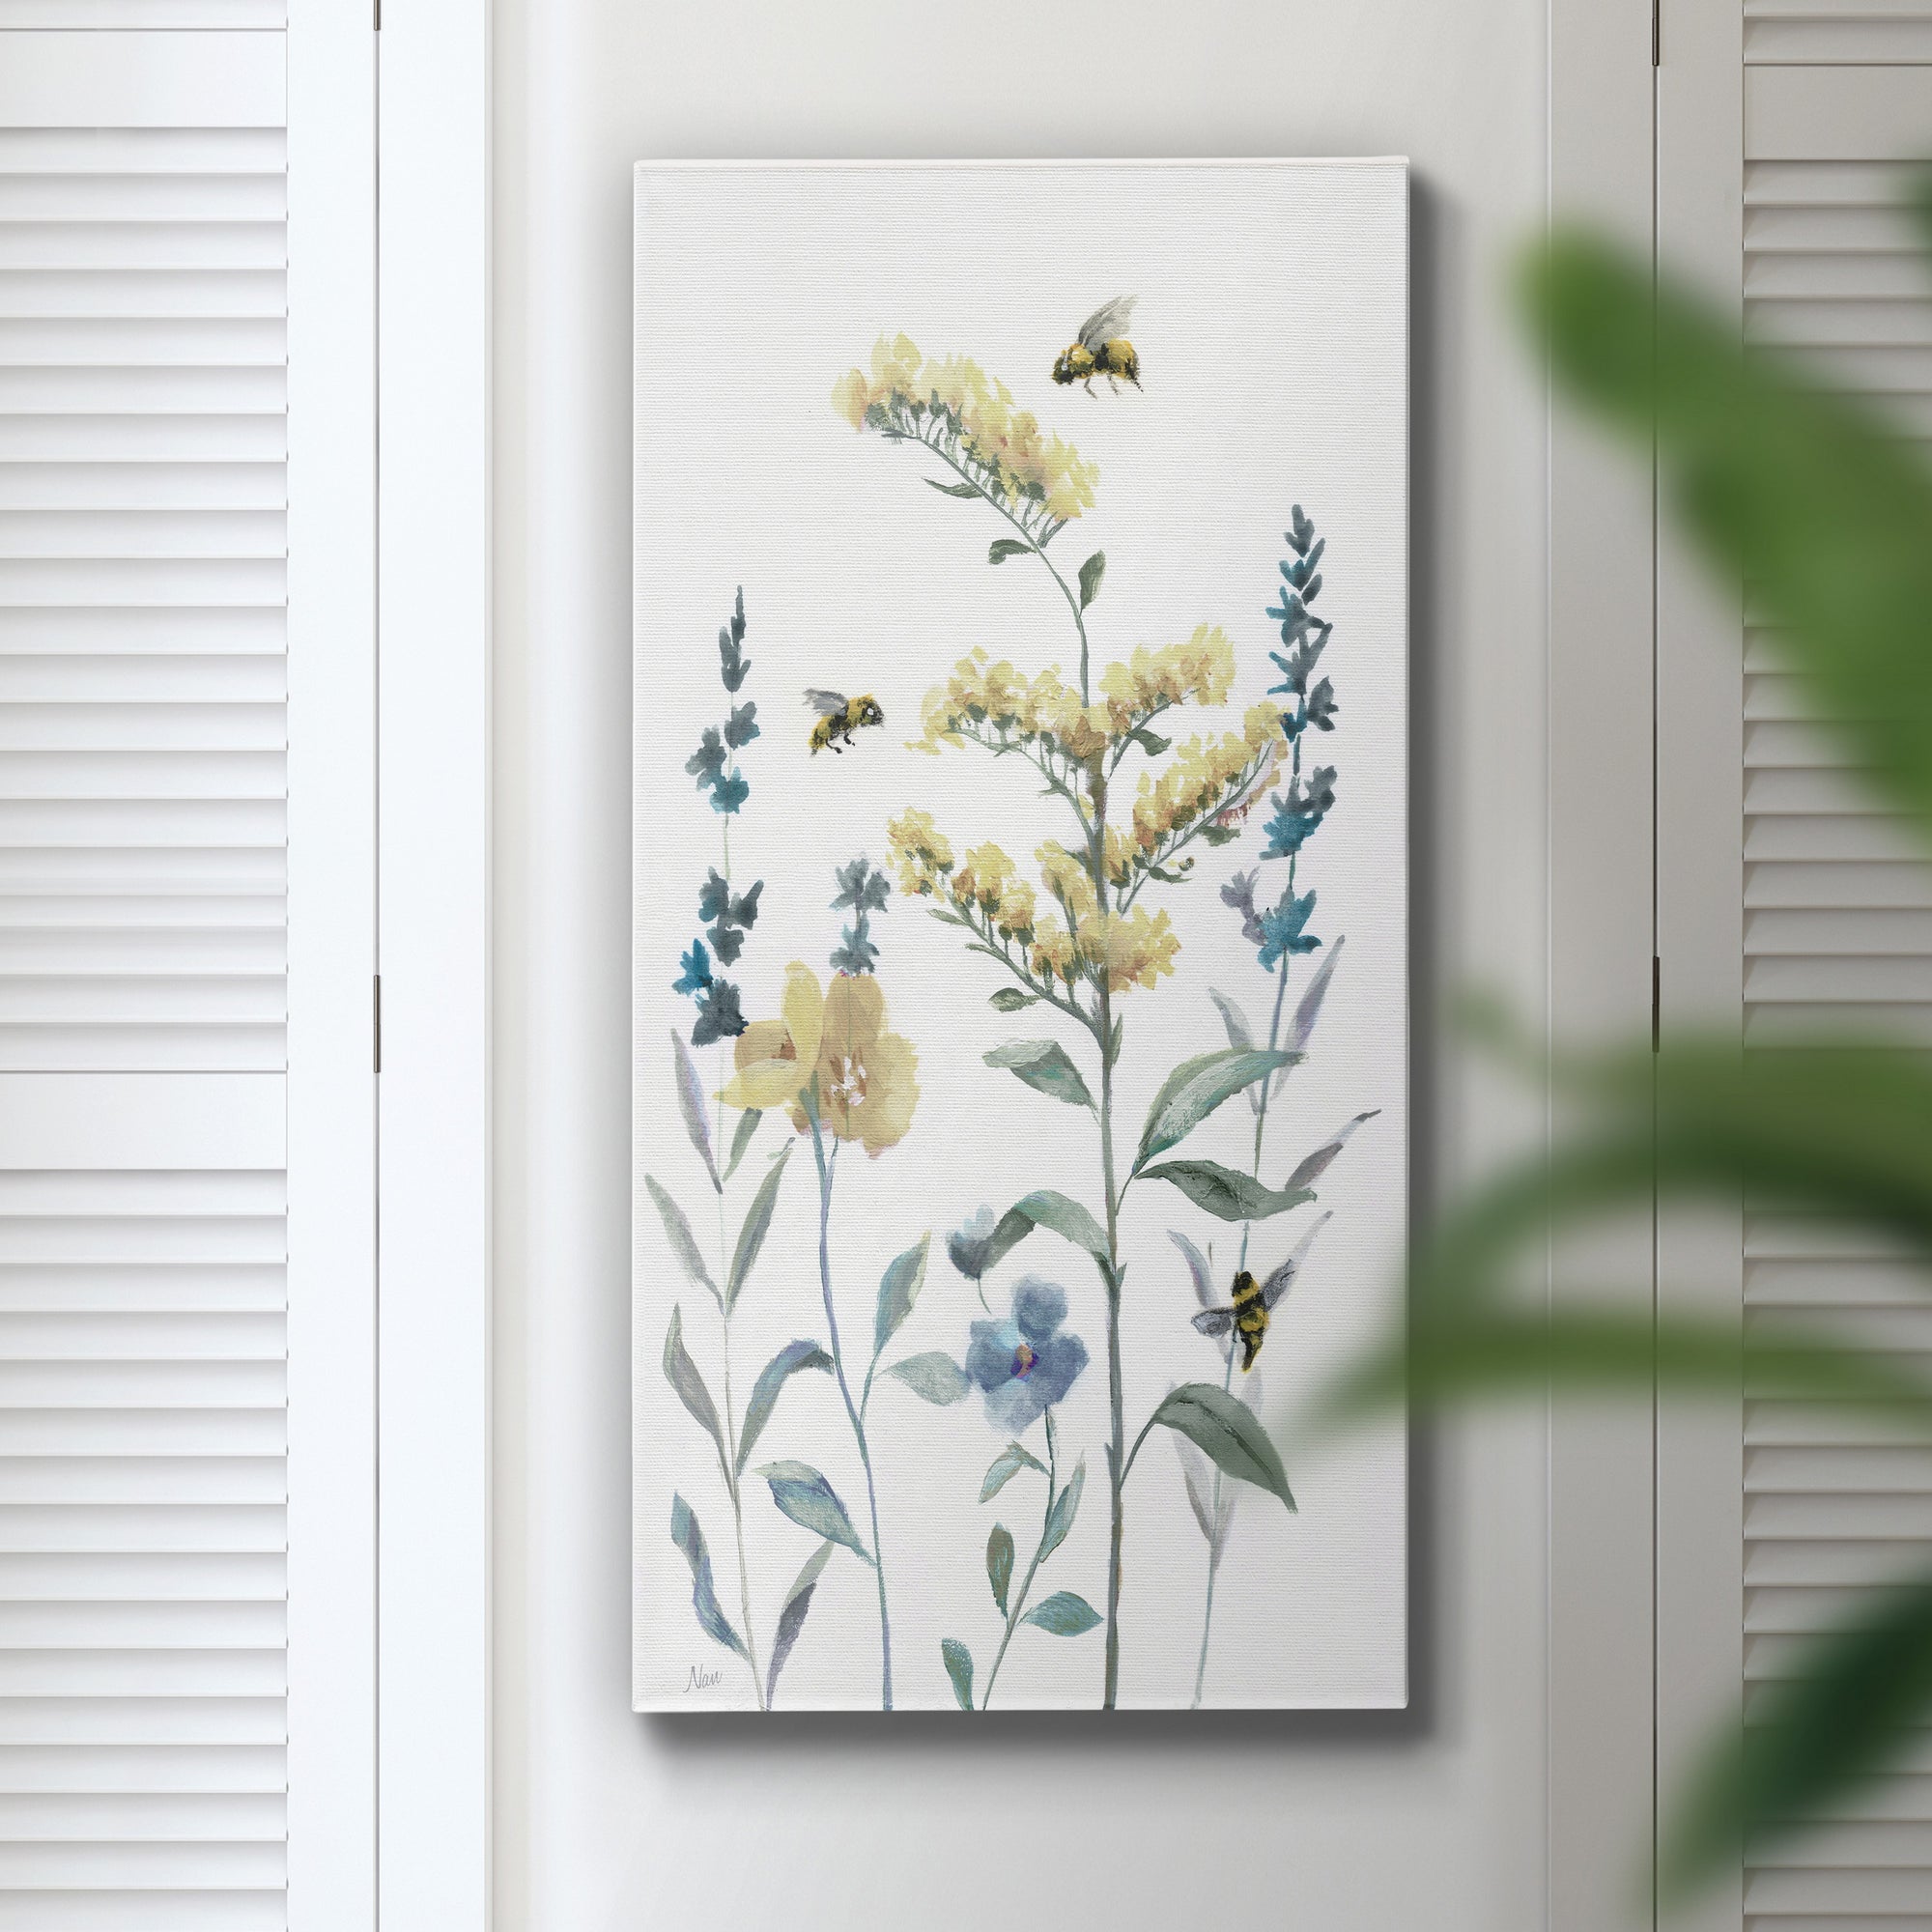 Bumble Bee Garden II - Premium Gallery Wrapped Canvas - Ready to Hang